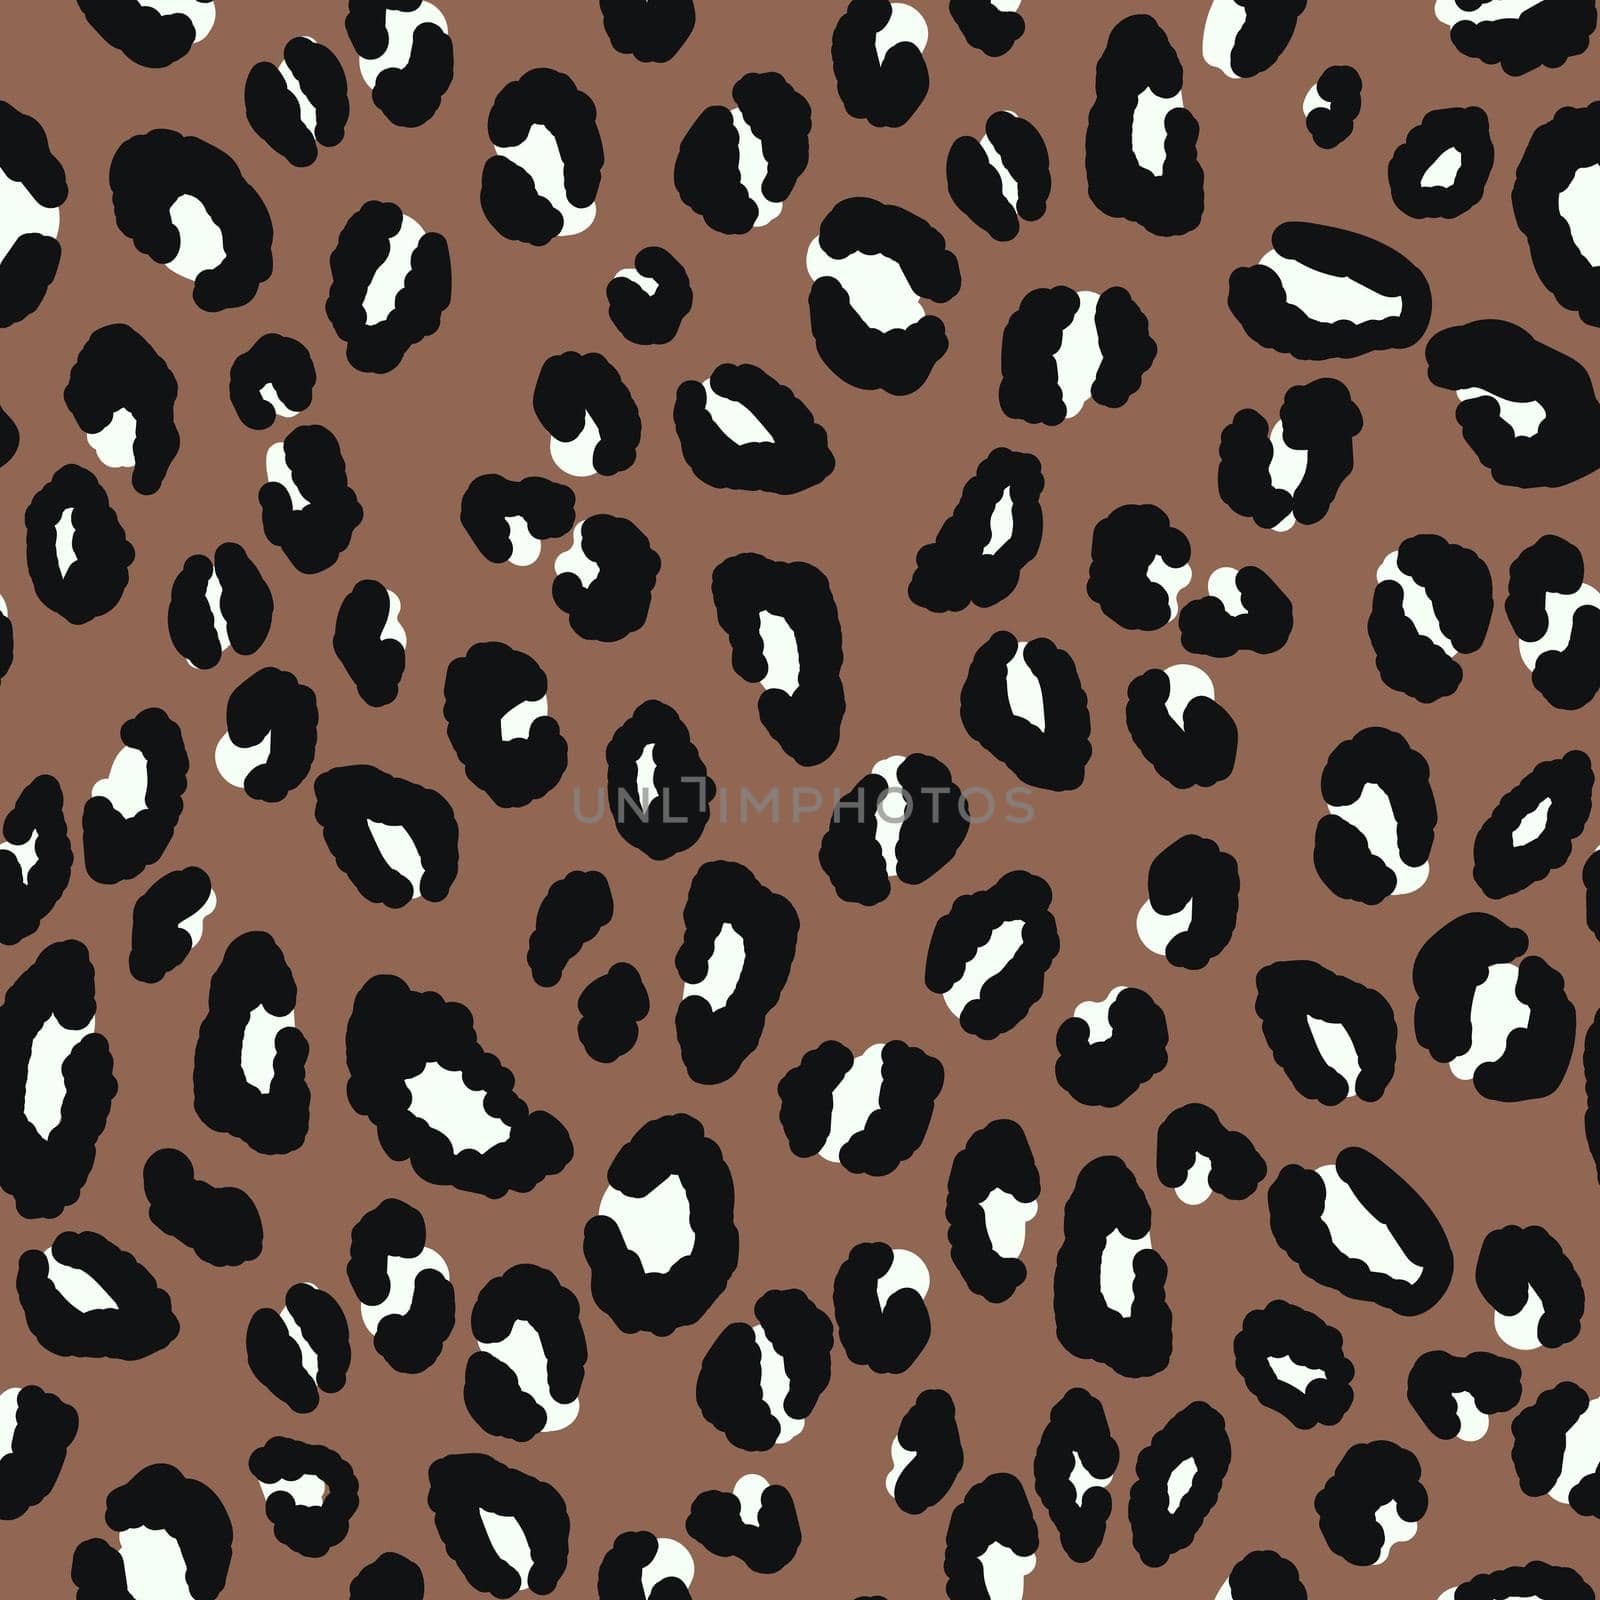 Abstract modern leopard seamless pattern. Animals trendy background. Brown and black decorative vector stock illustration for print, card, postcard, fabric, textile. Modern ornament of stylized skin